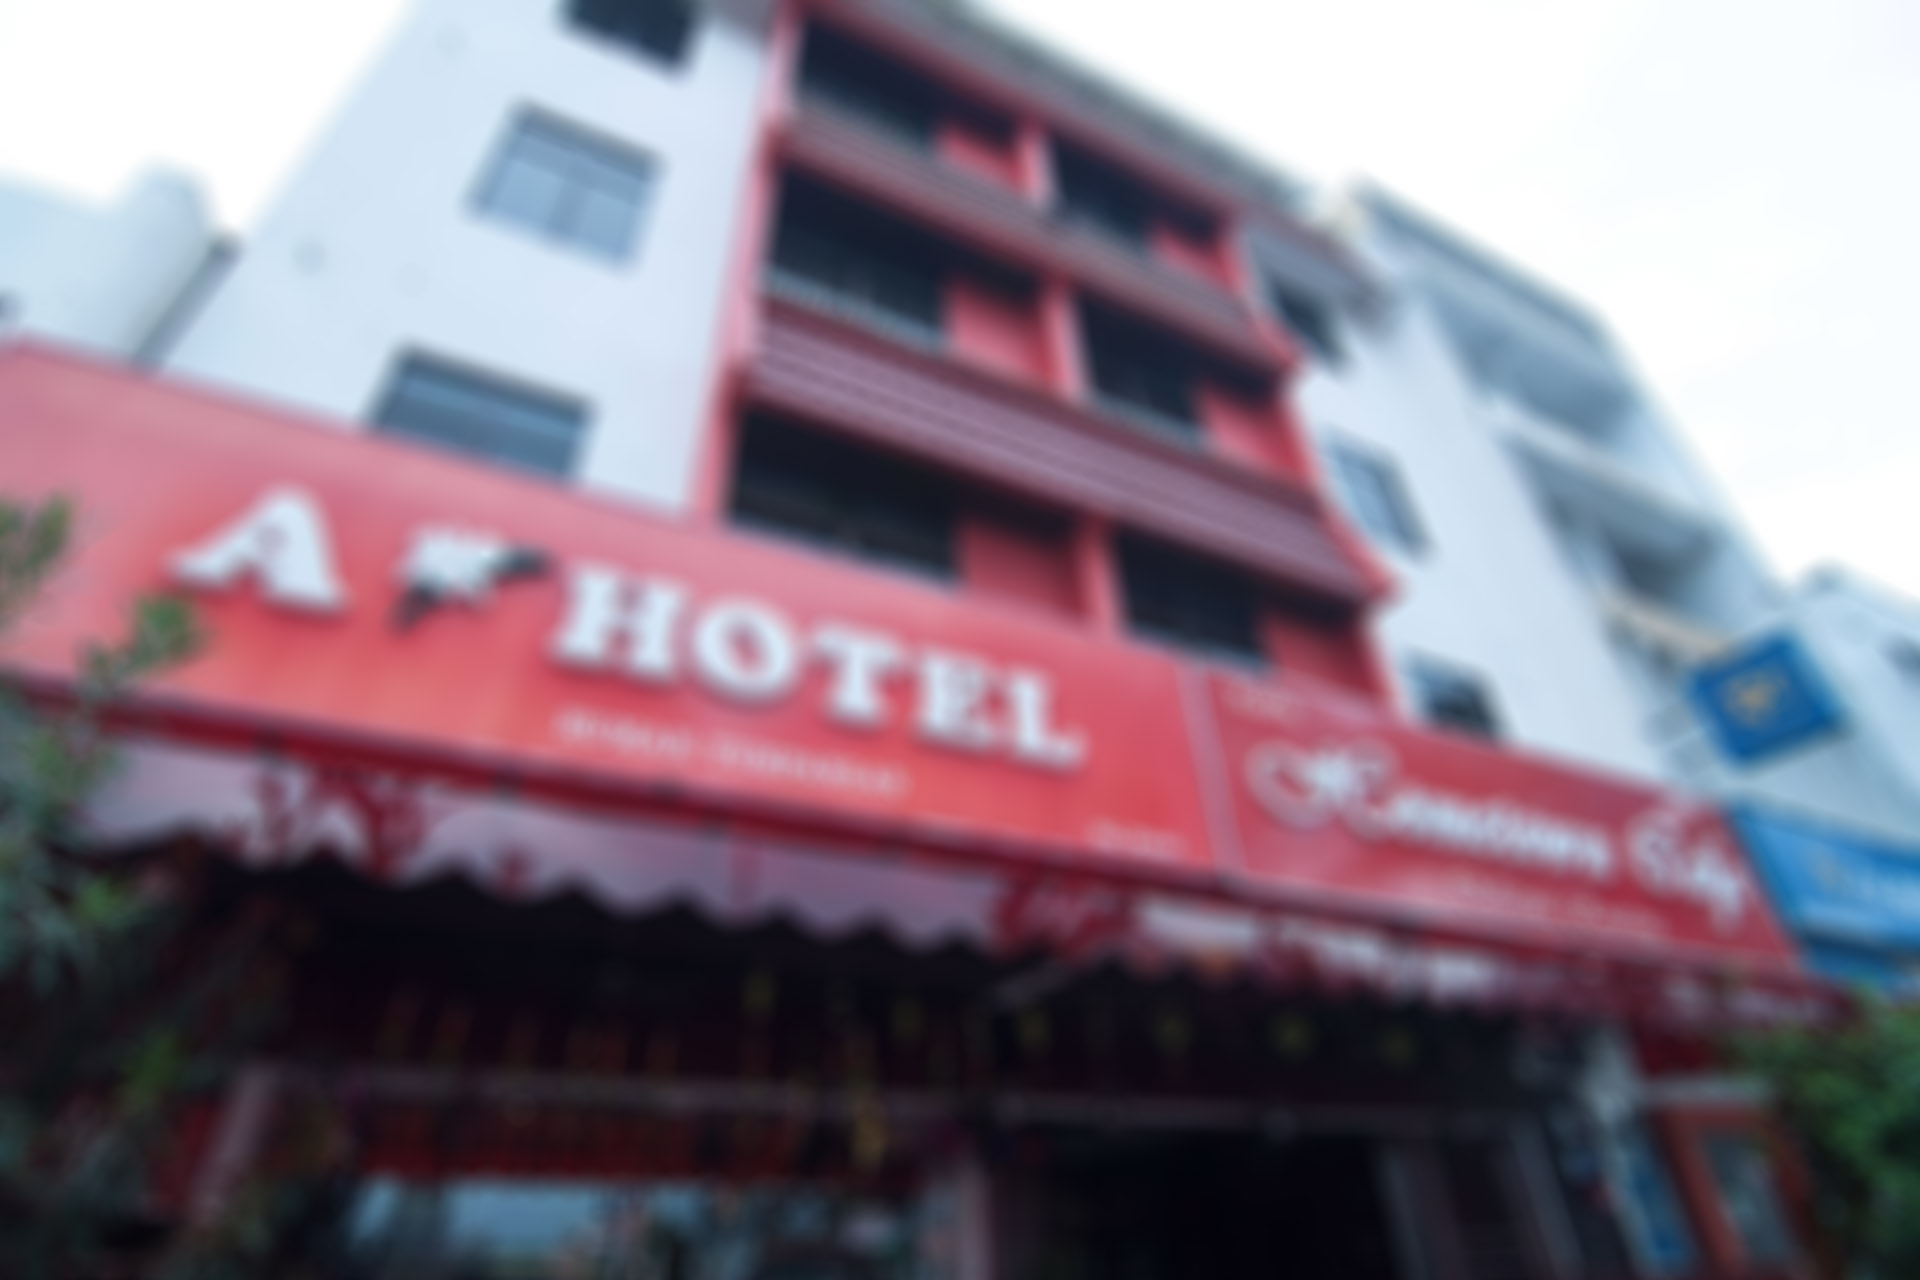 AG HOTEL CHEAP STAY